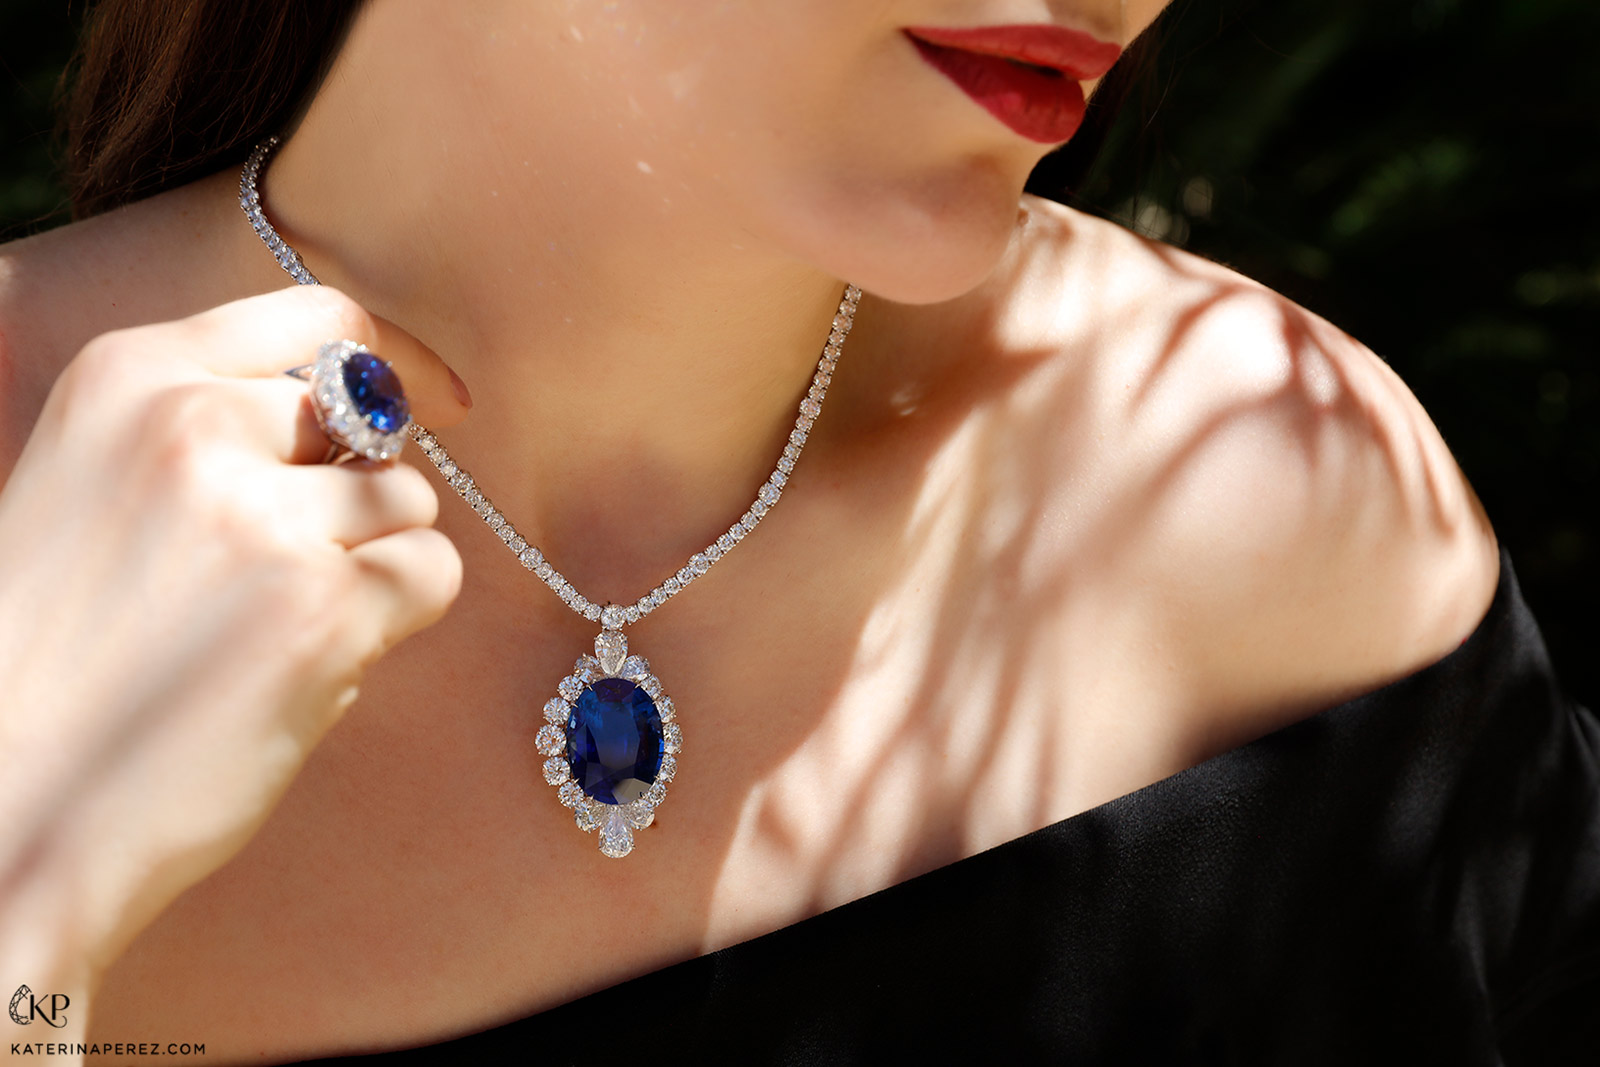 Bayco necklace with 60 carat oval sapphire from Burma and diamonds